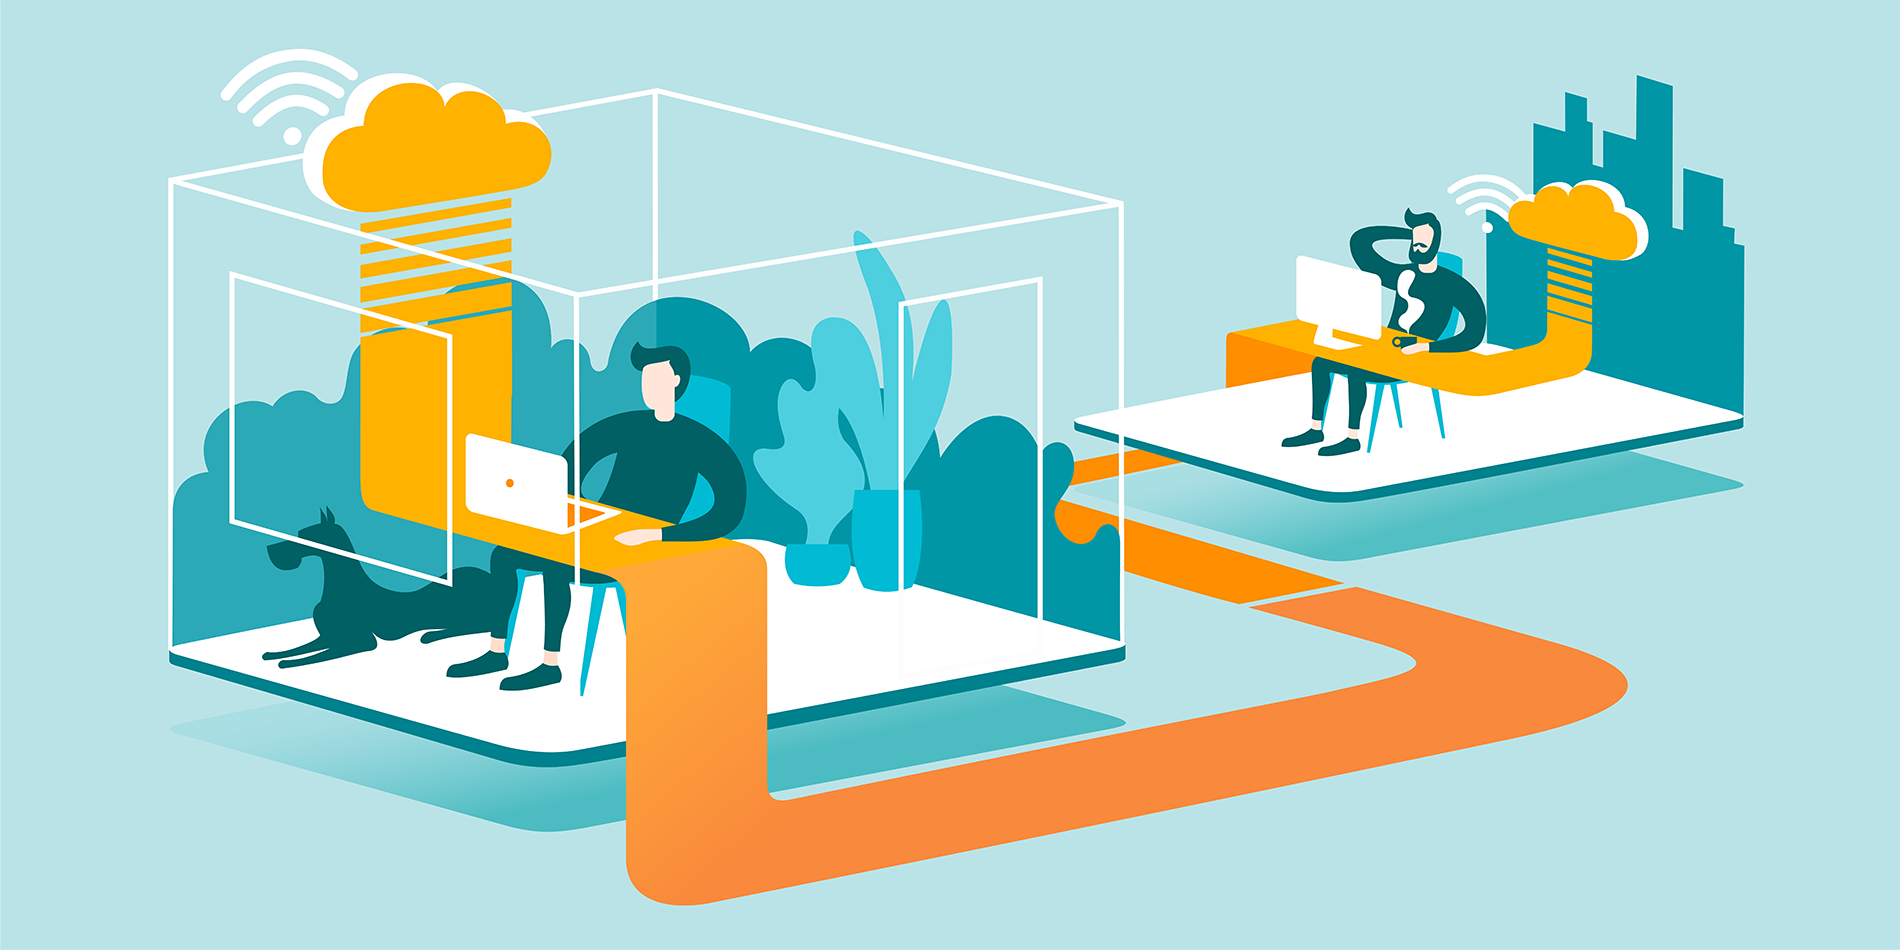 Isometric layout explaining the principle of remote work in the office through the cloud.